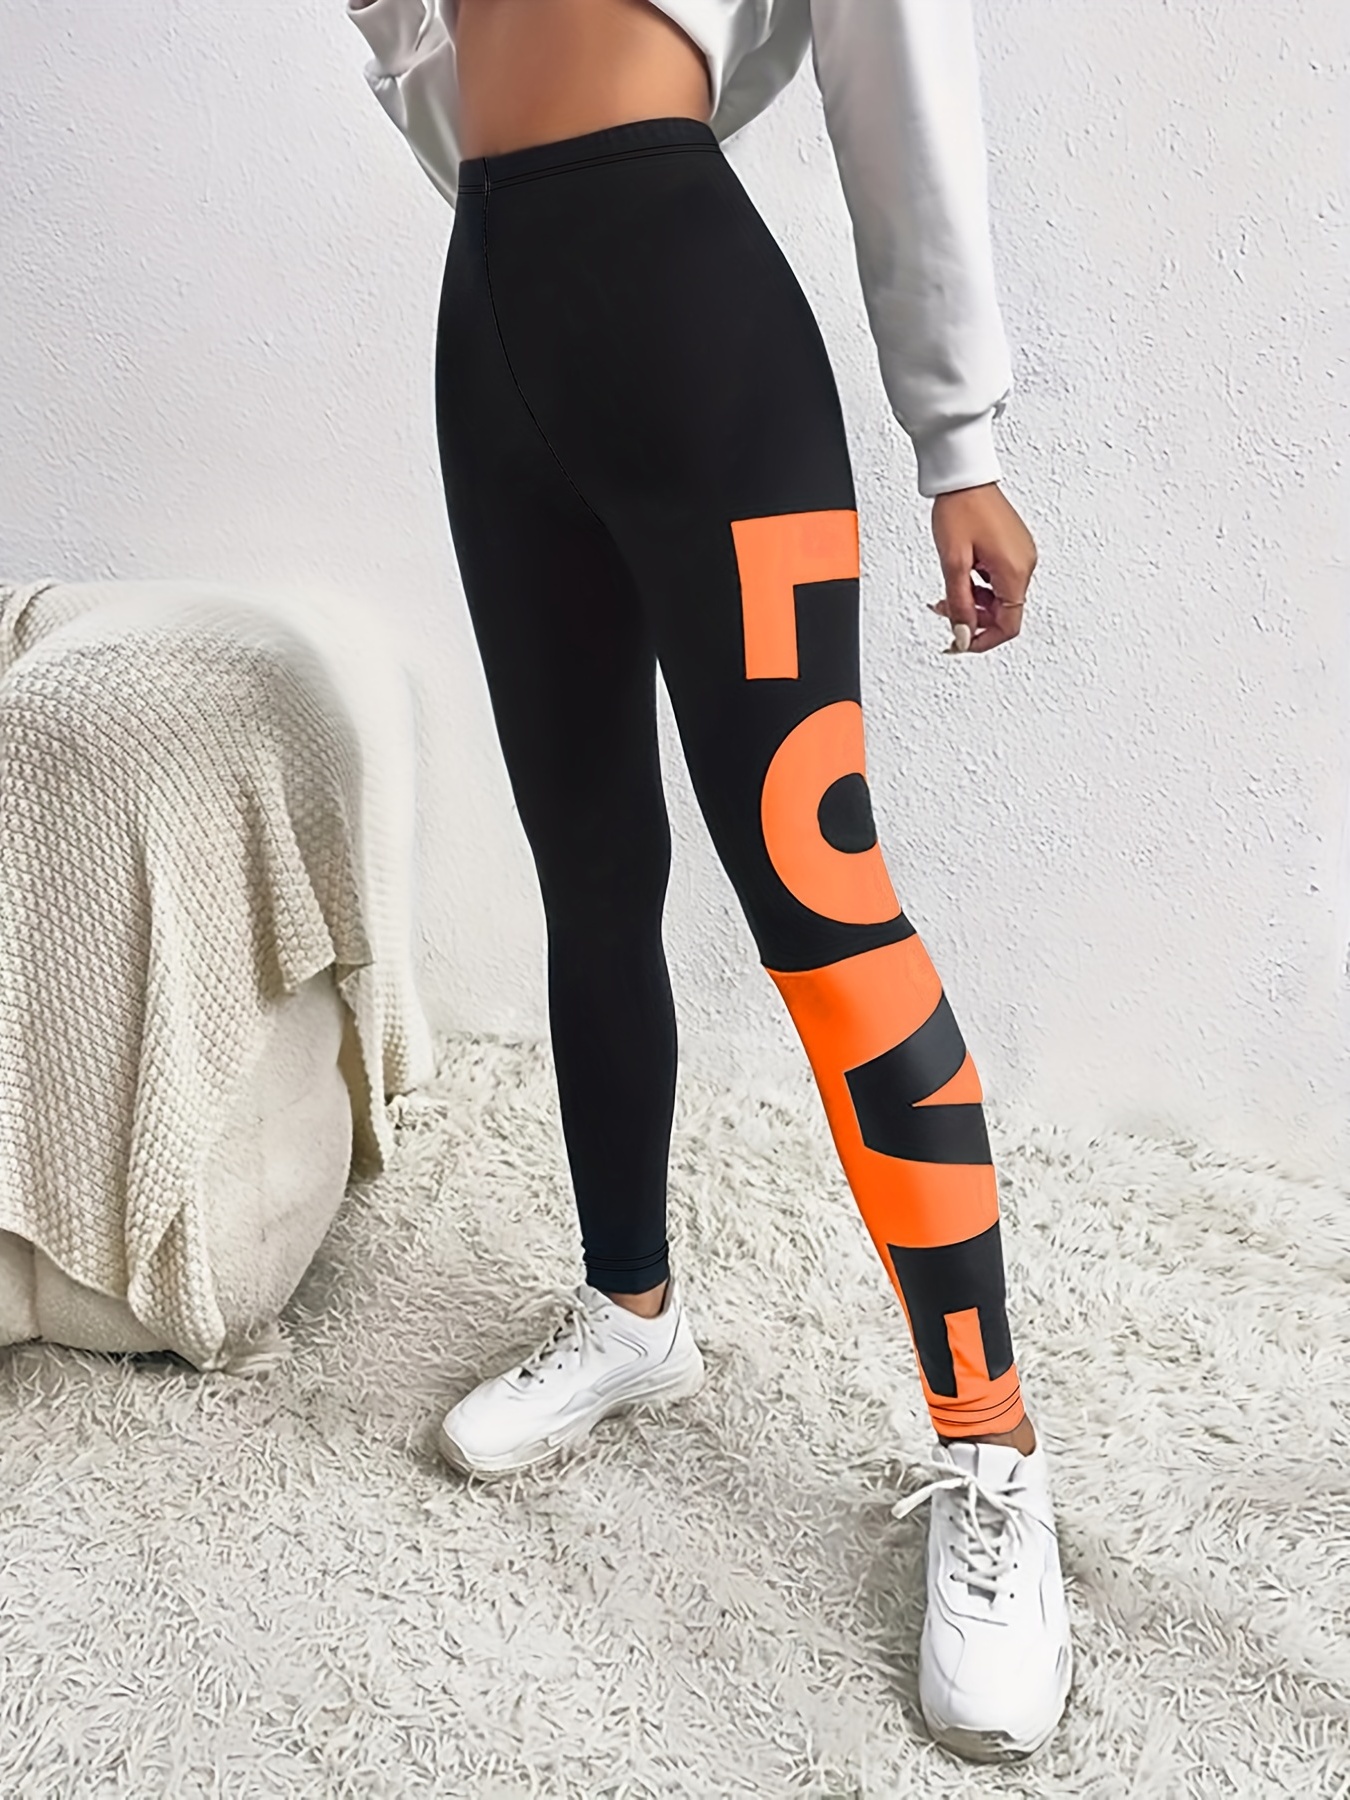 Comfy and Stylish Yoga Bottoms for Every Workout